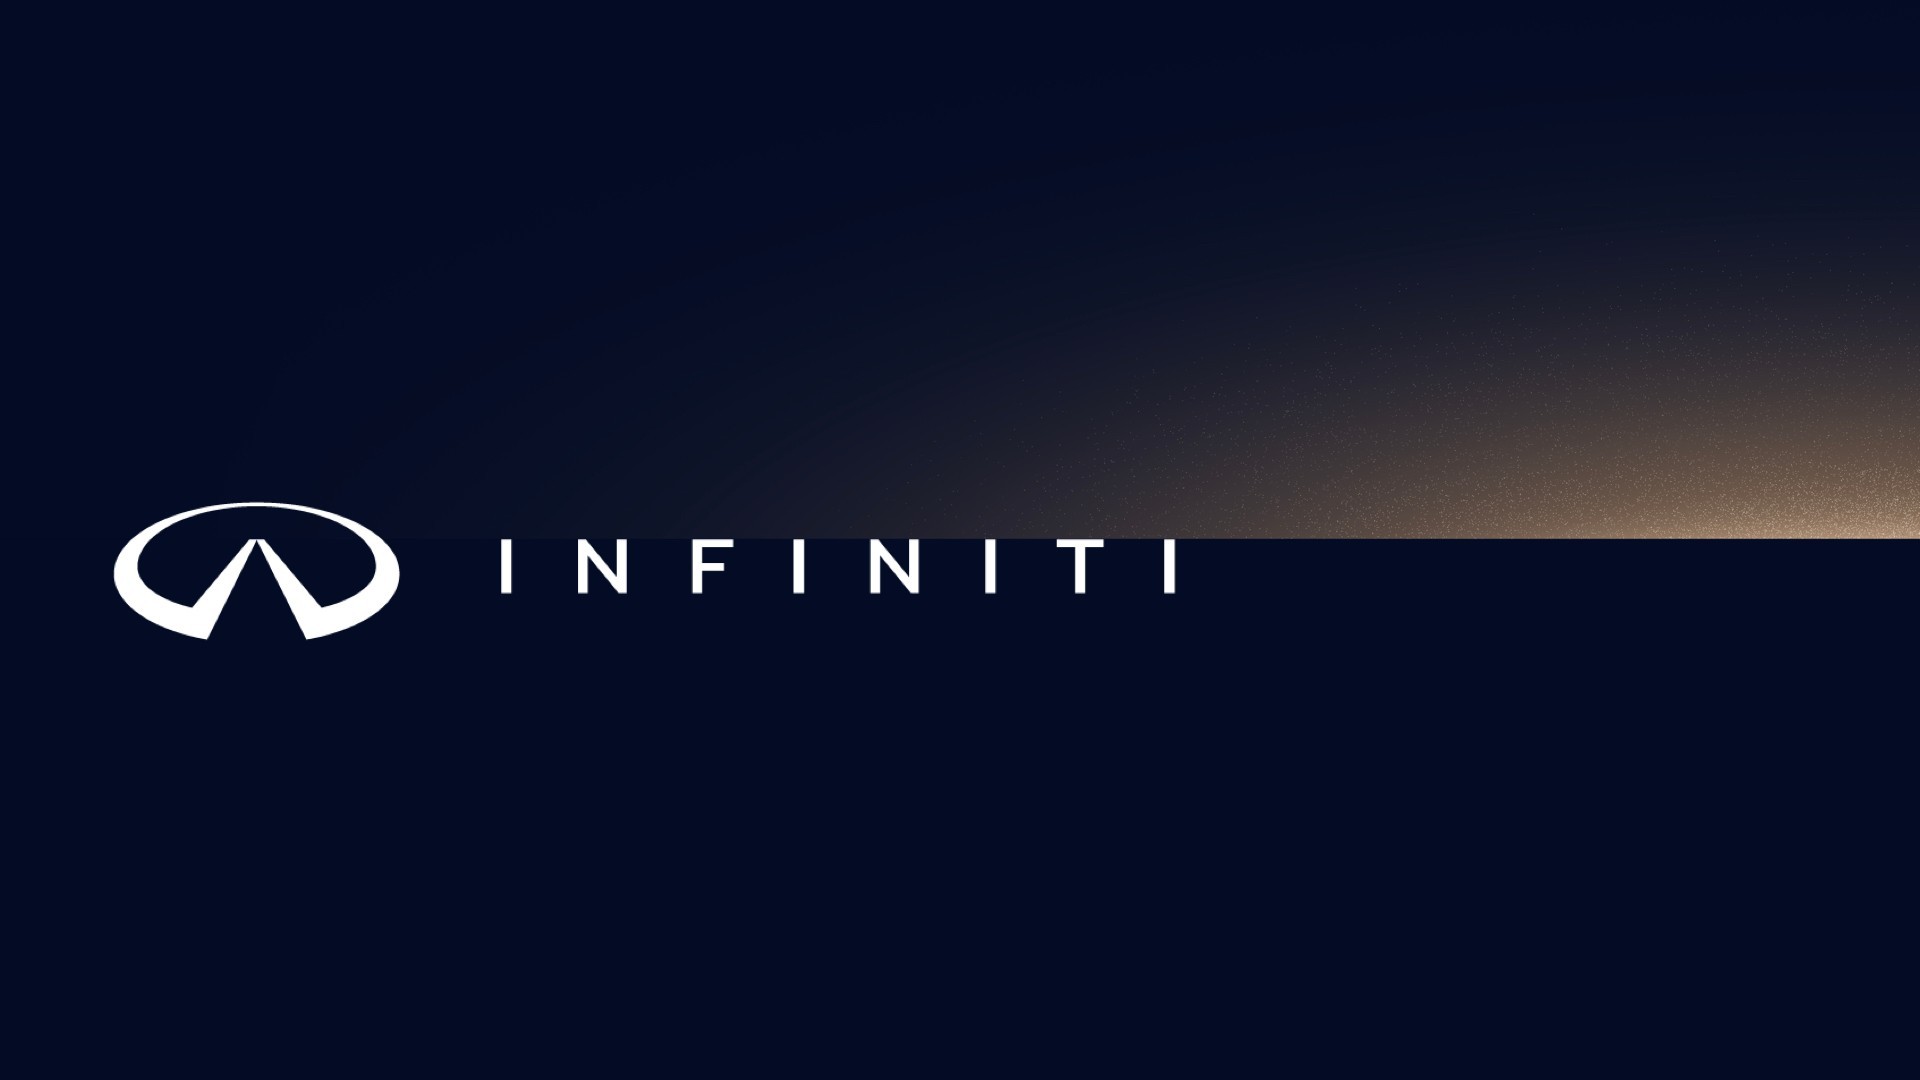 infiniti teases vision qe: a glimpse into their first electric vehicle